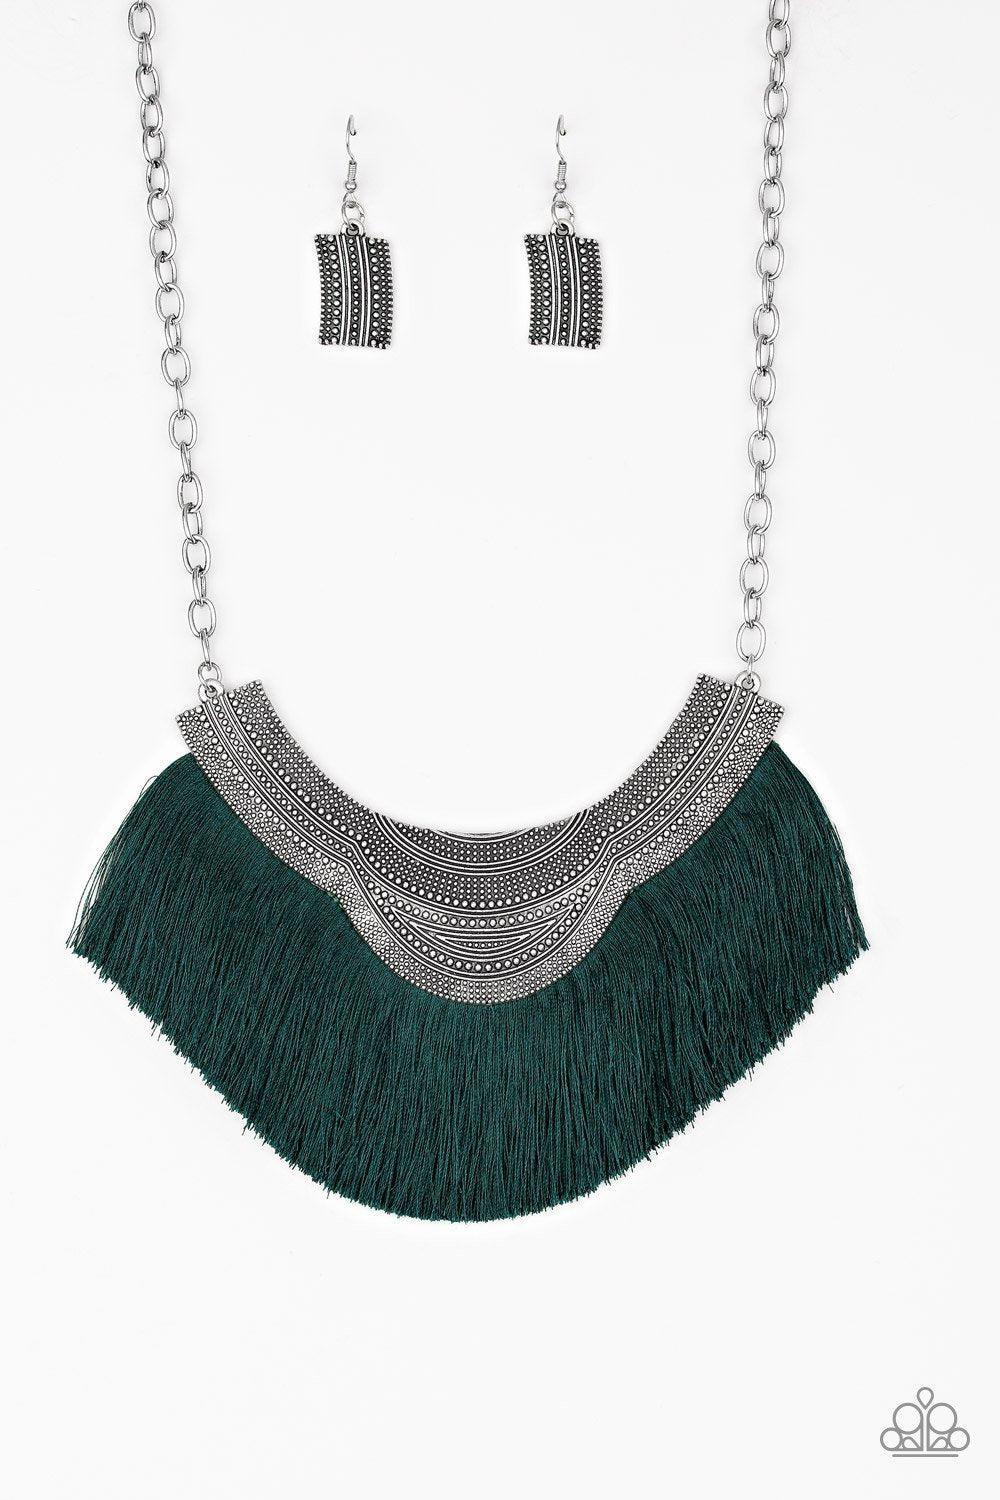 My Pharaoh Lady Green Fringe Necklace - Paparazzi Accessories-CarasShop.com - $5 Jewelry by Cara Jewels